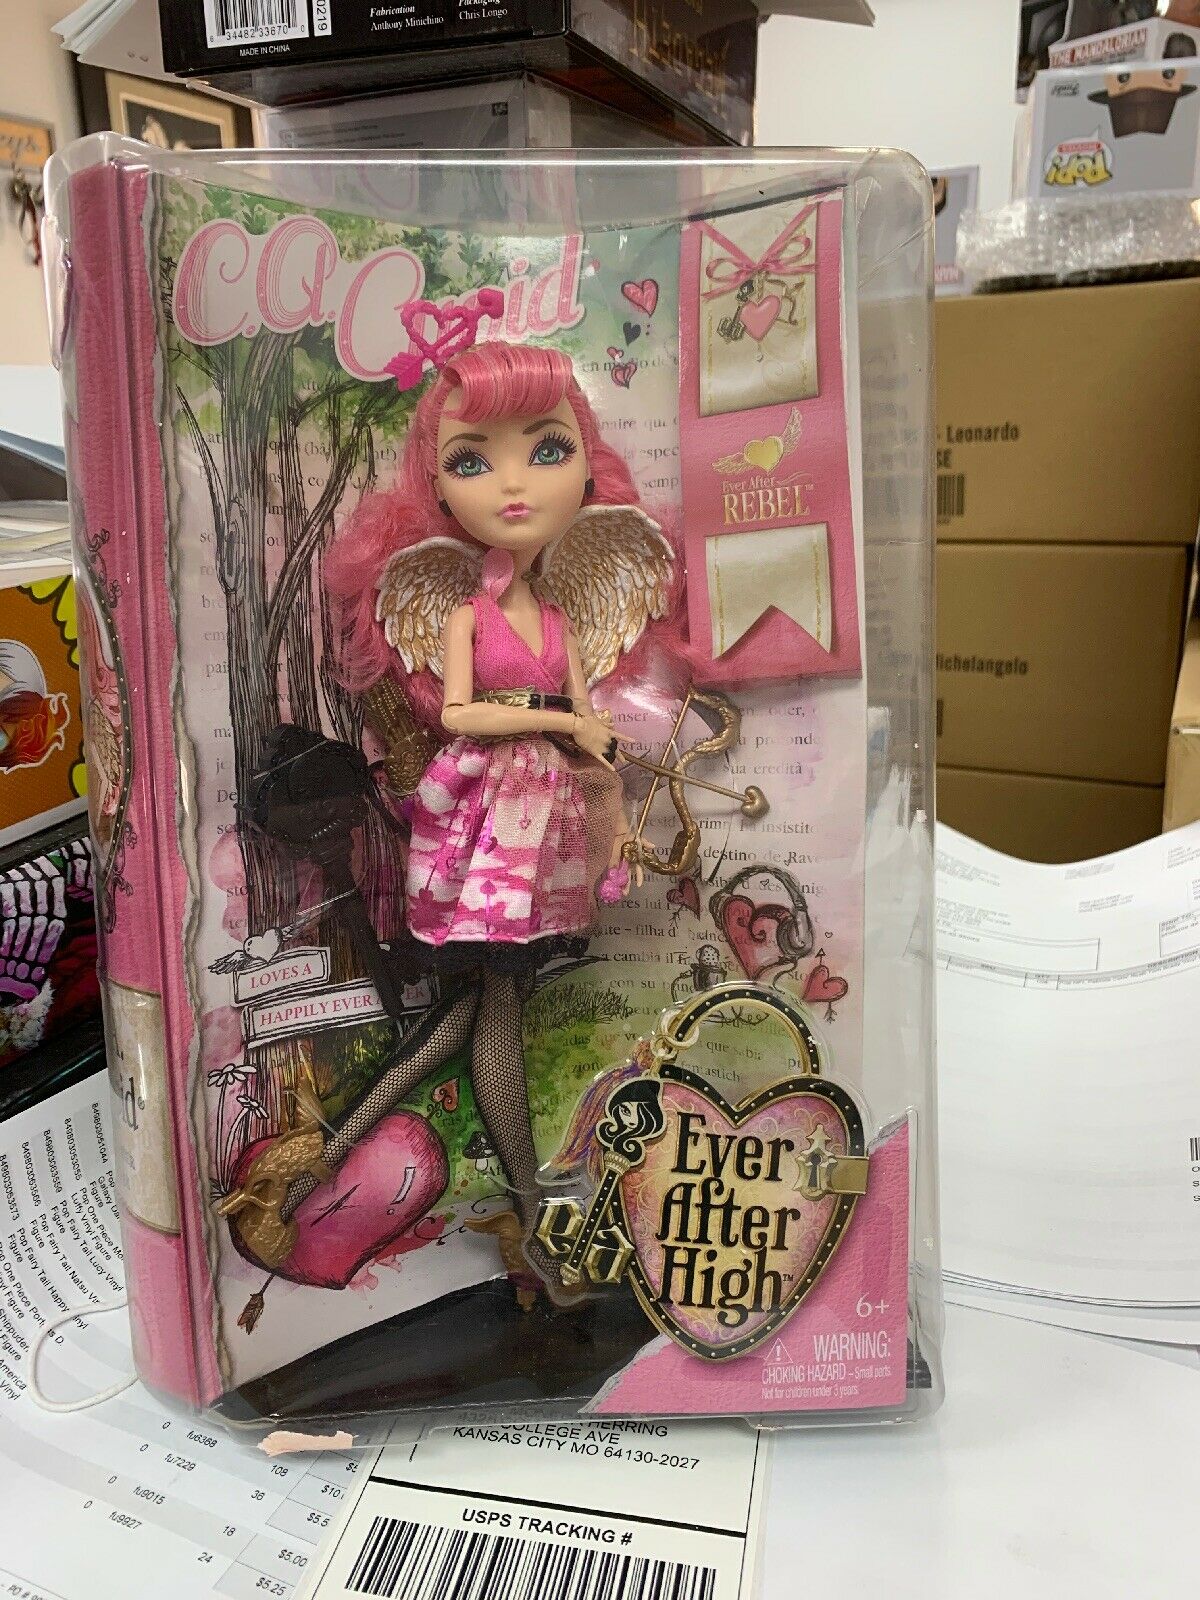 Ever After High CA Cupid Doll First Edition NRFB Daughter If Eros New 2013